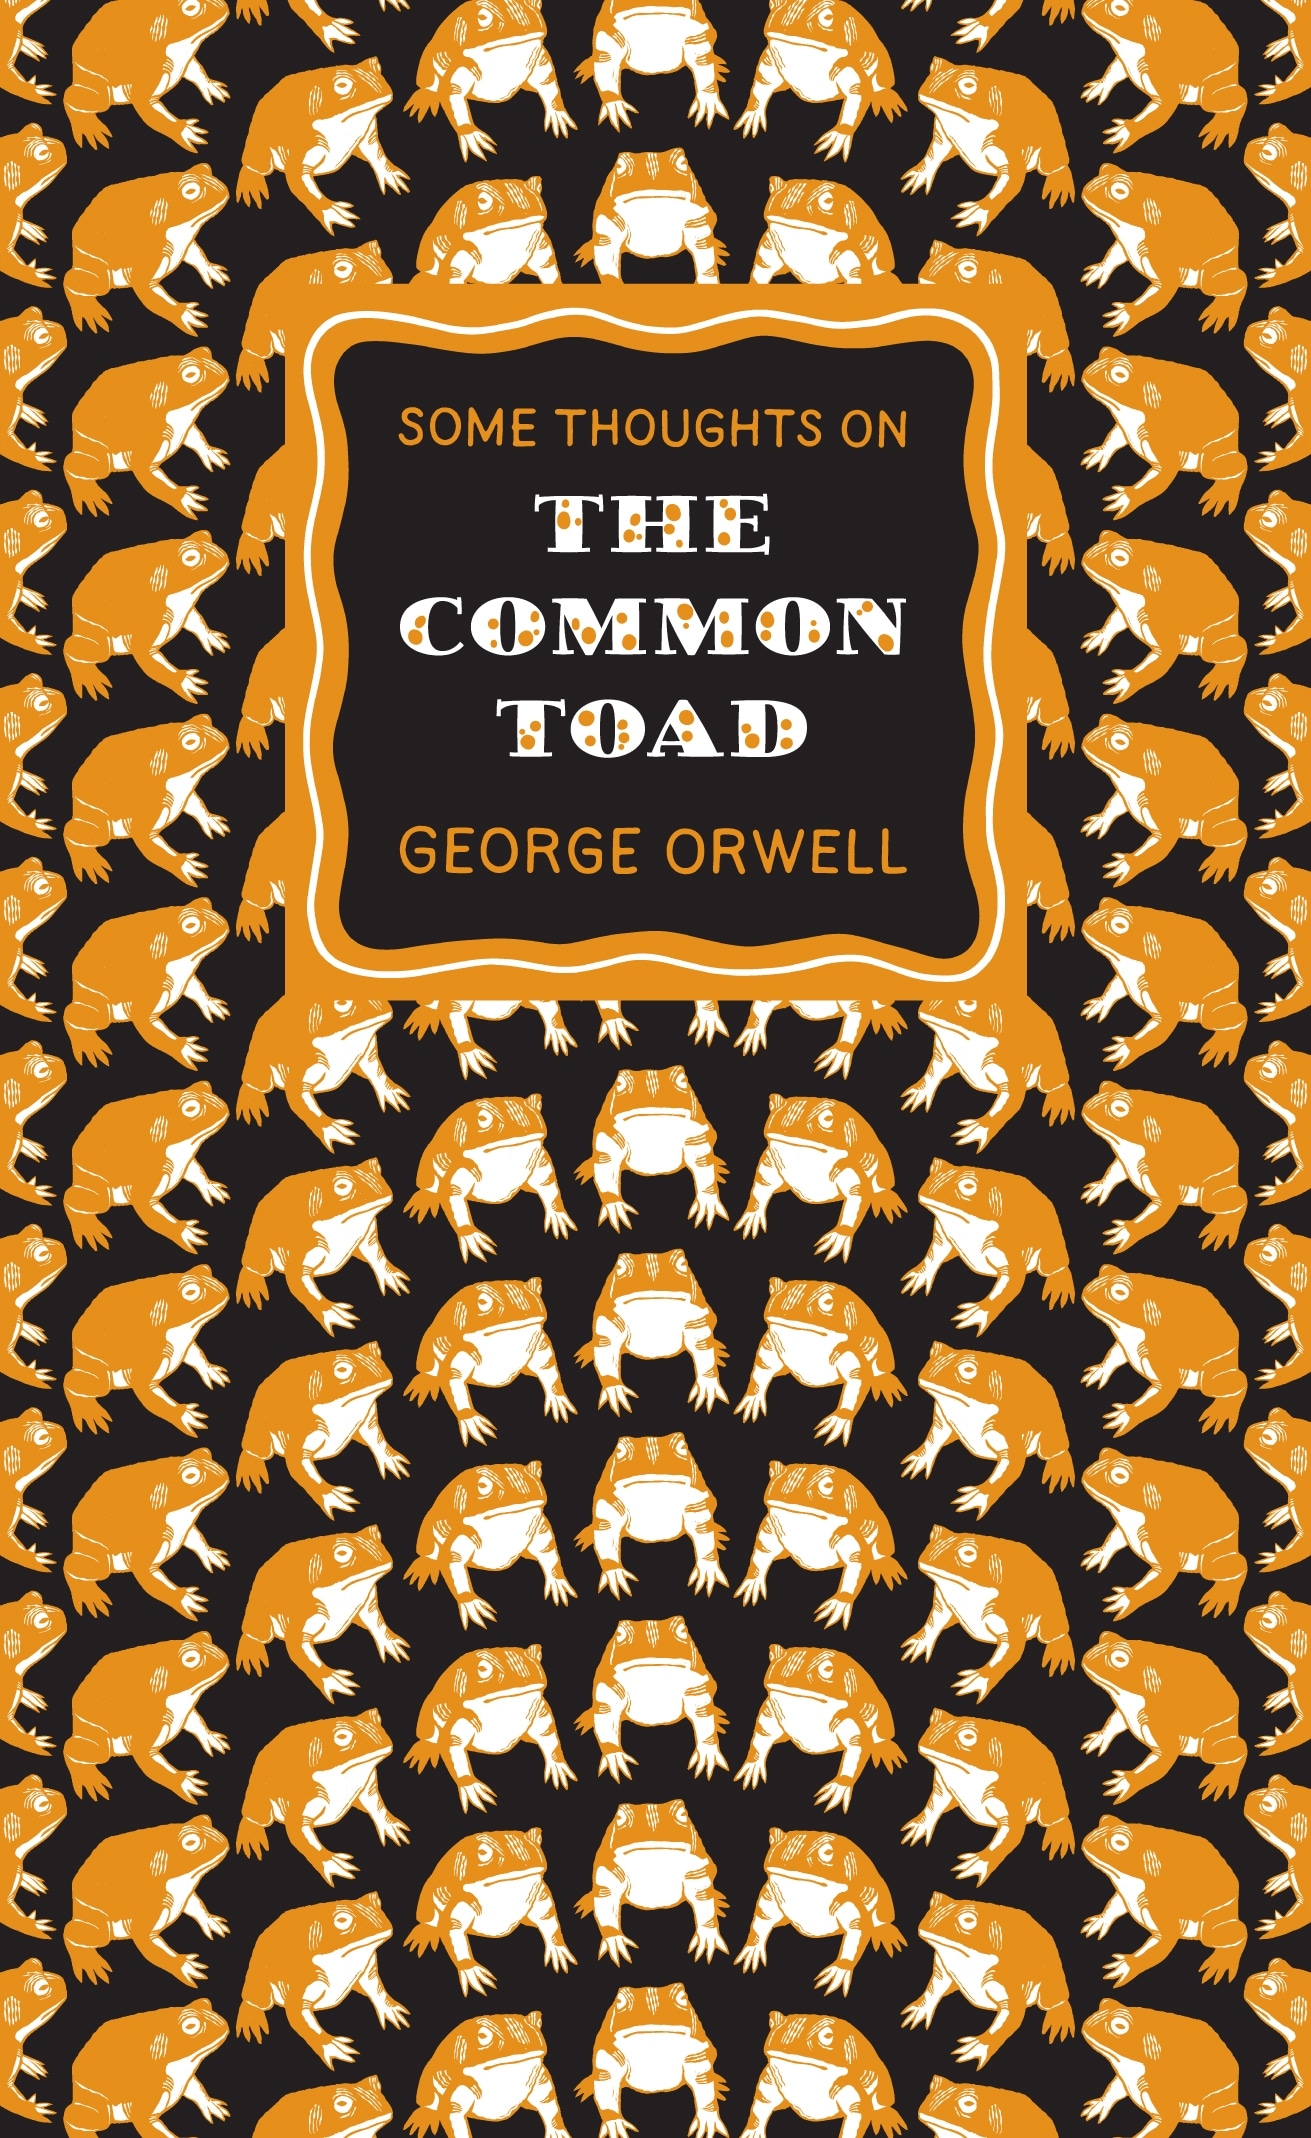 Book “Some Thoughts on the Common Toad” by George Orwell — August 26, 2010